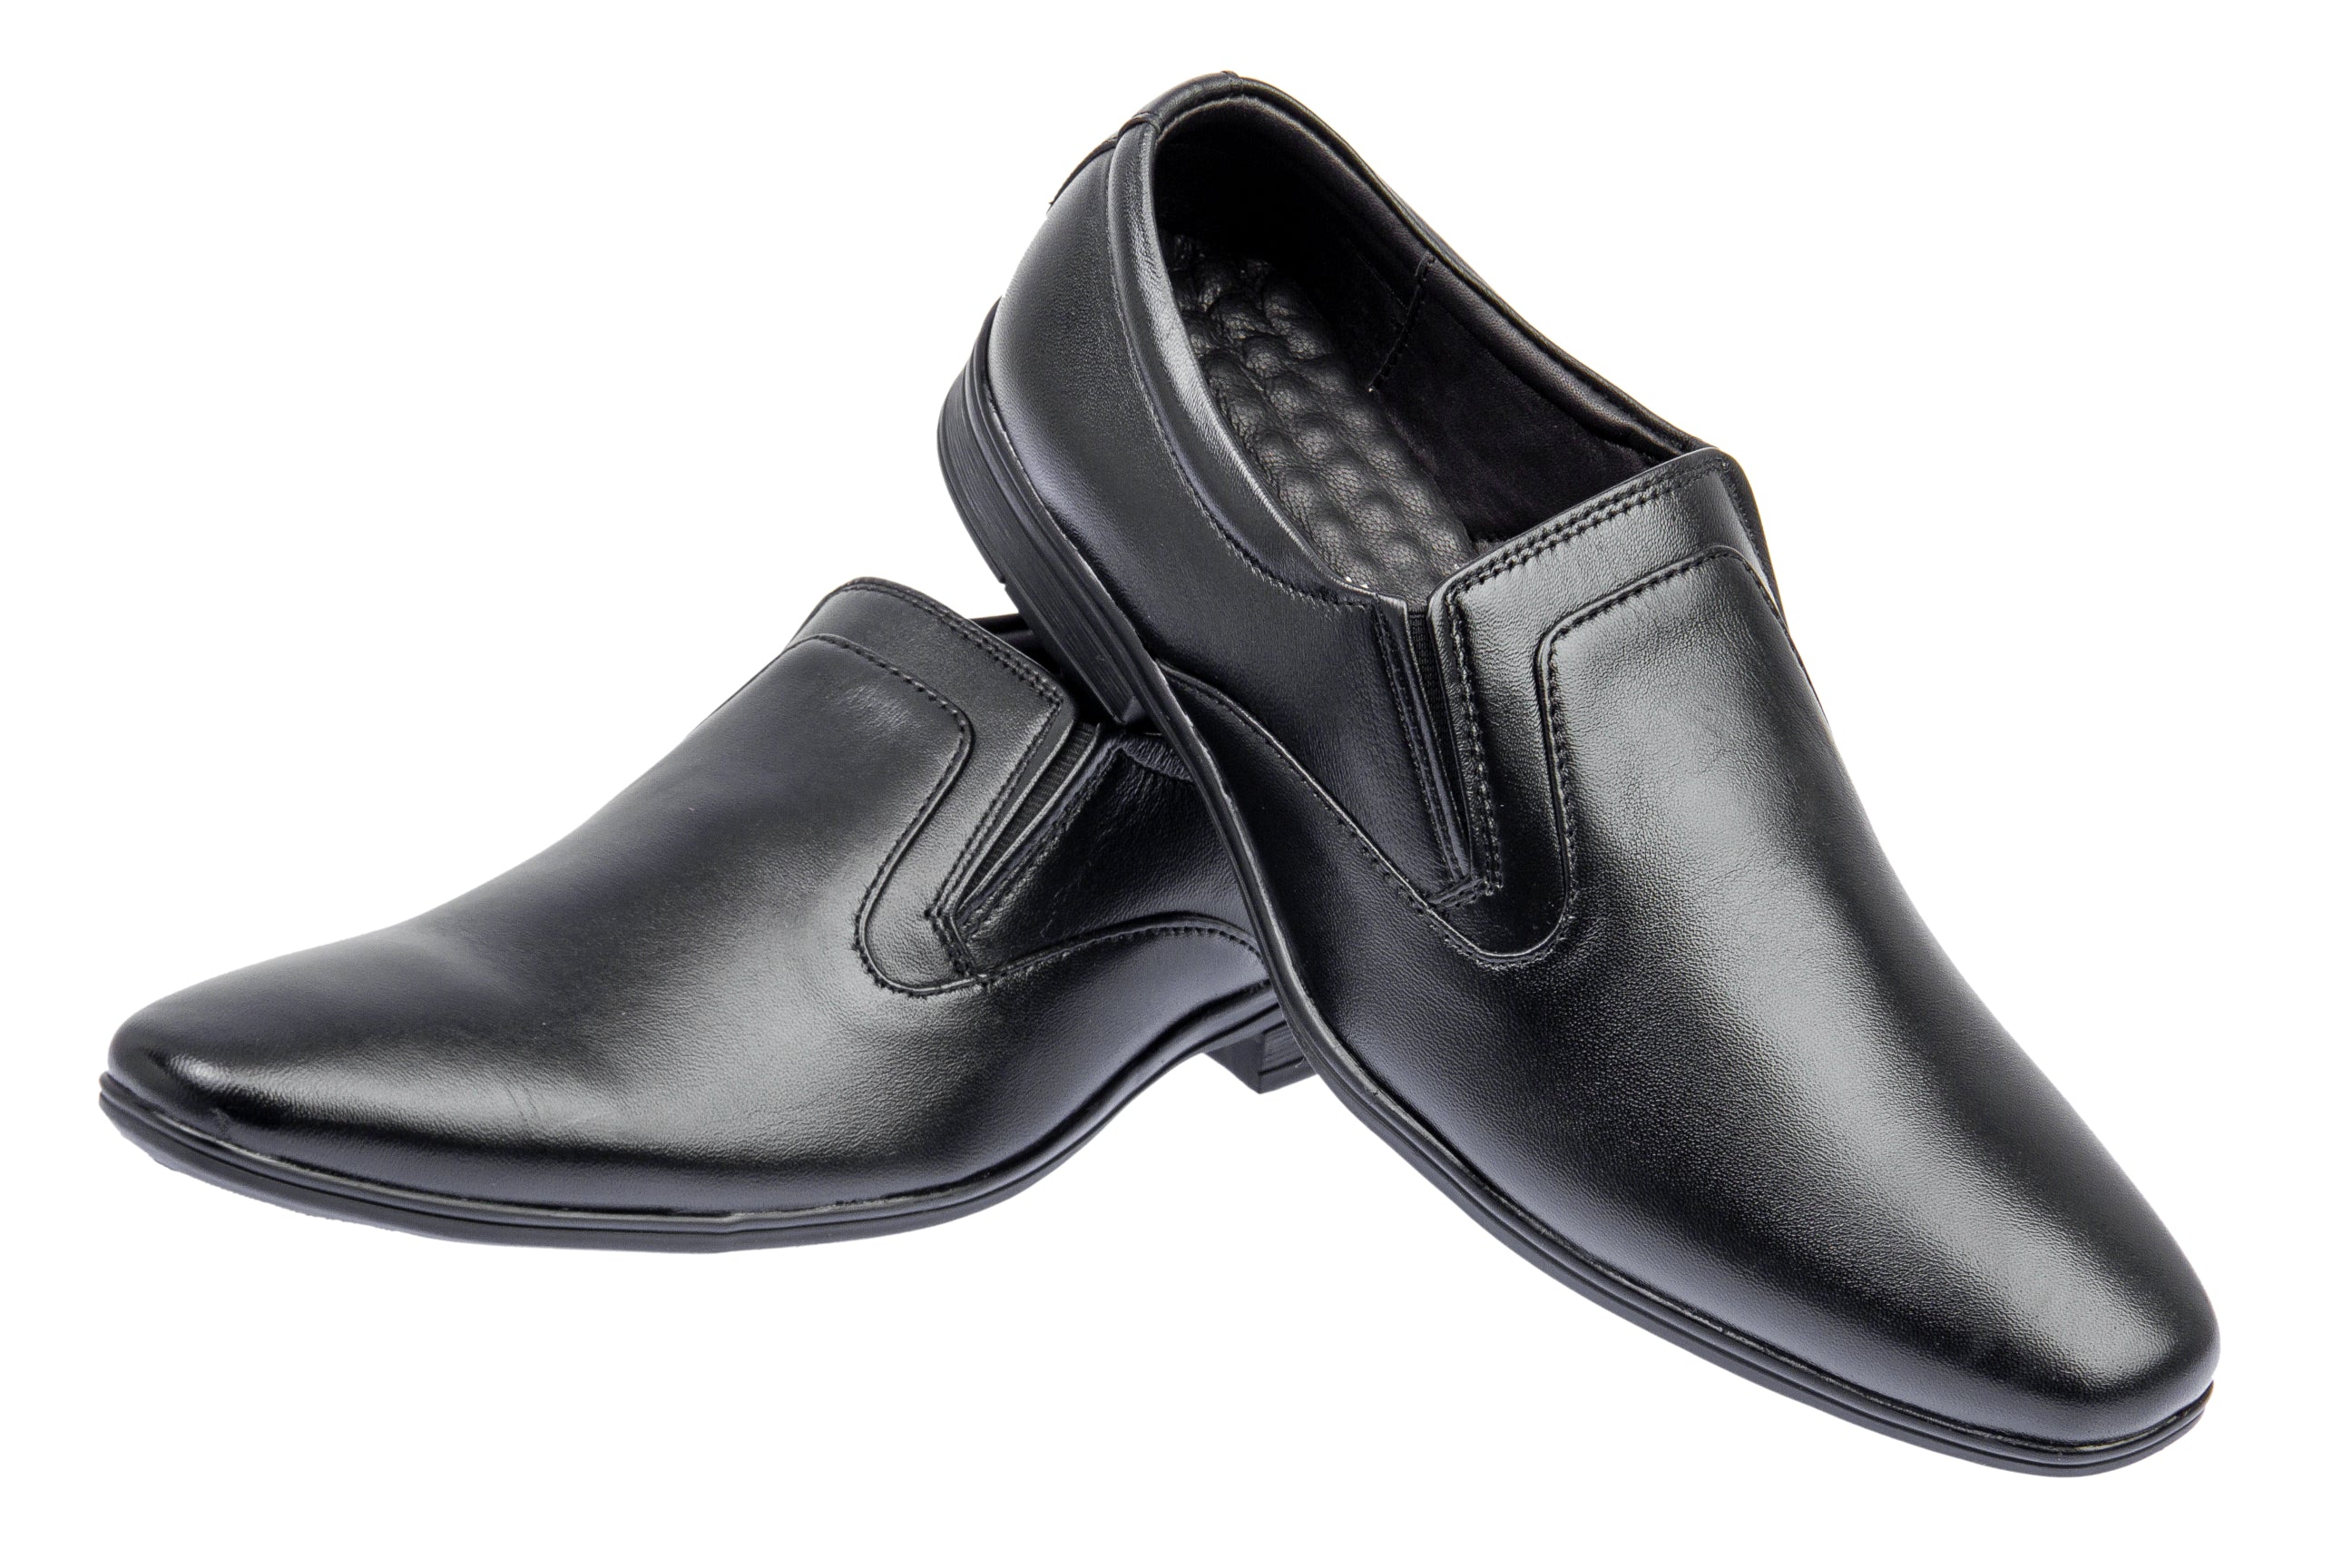 The Ultimate Men's Dress Shoes for Plantar Fasciitis